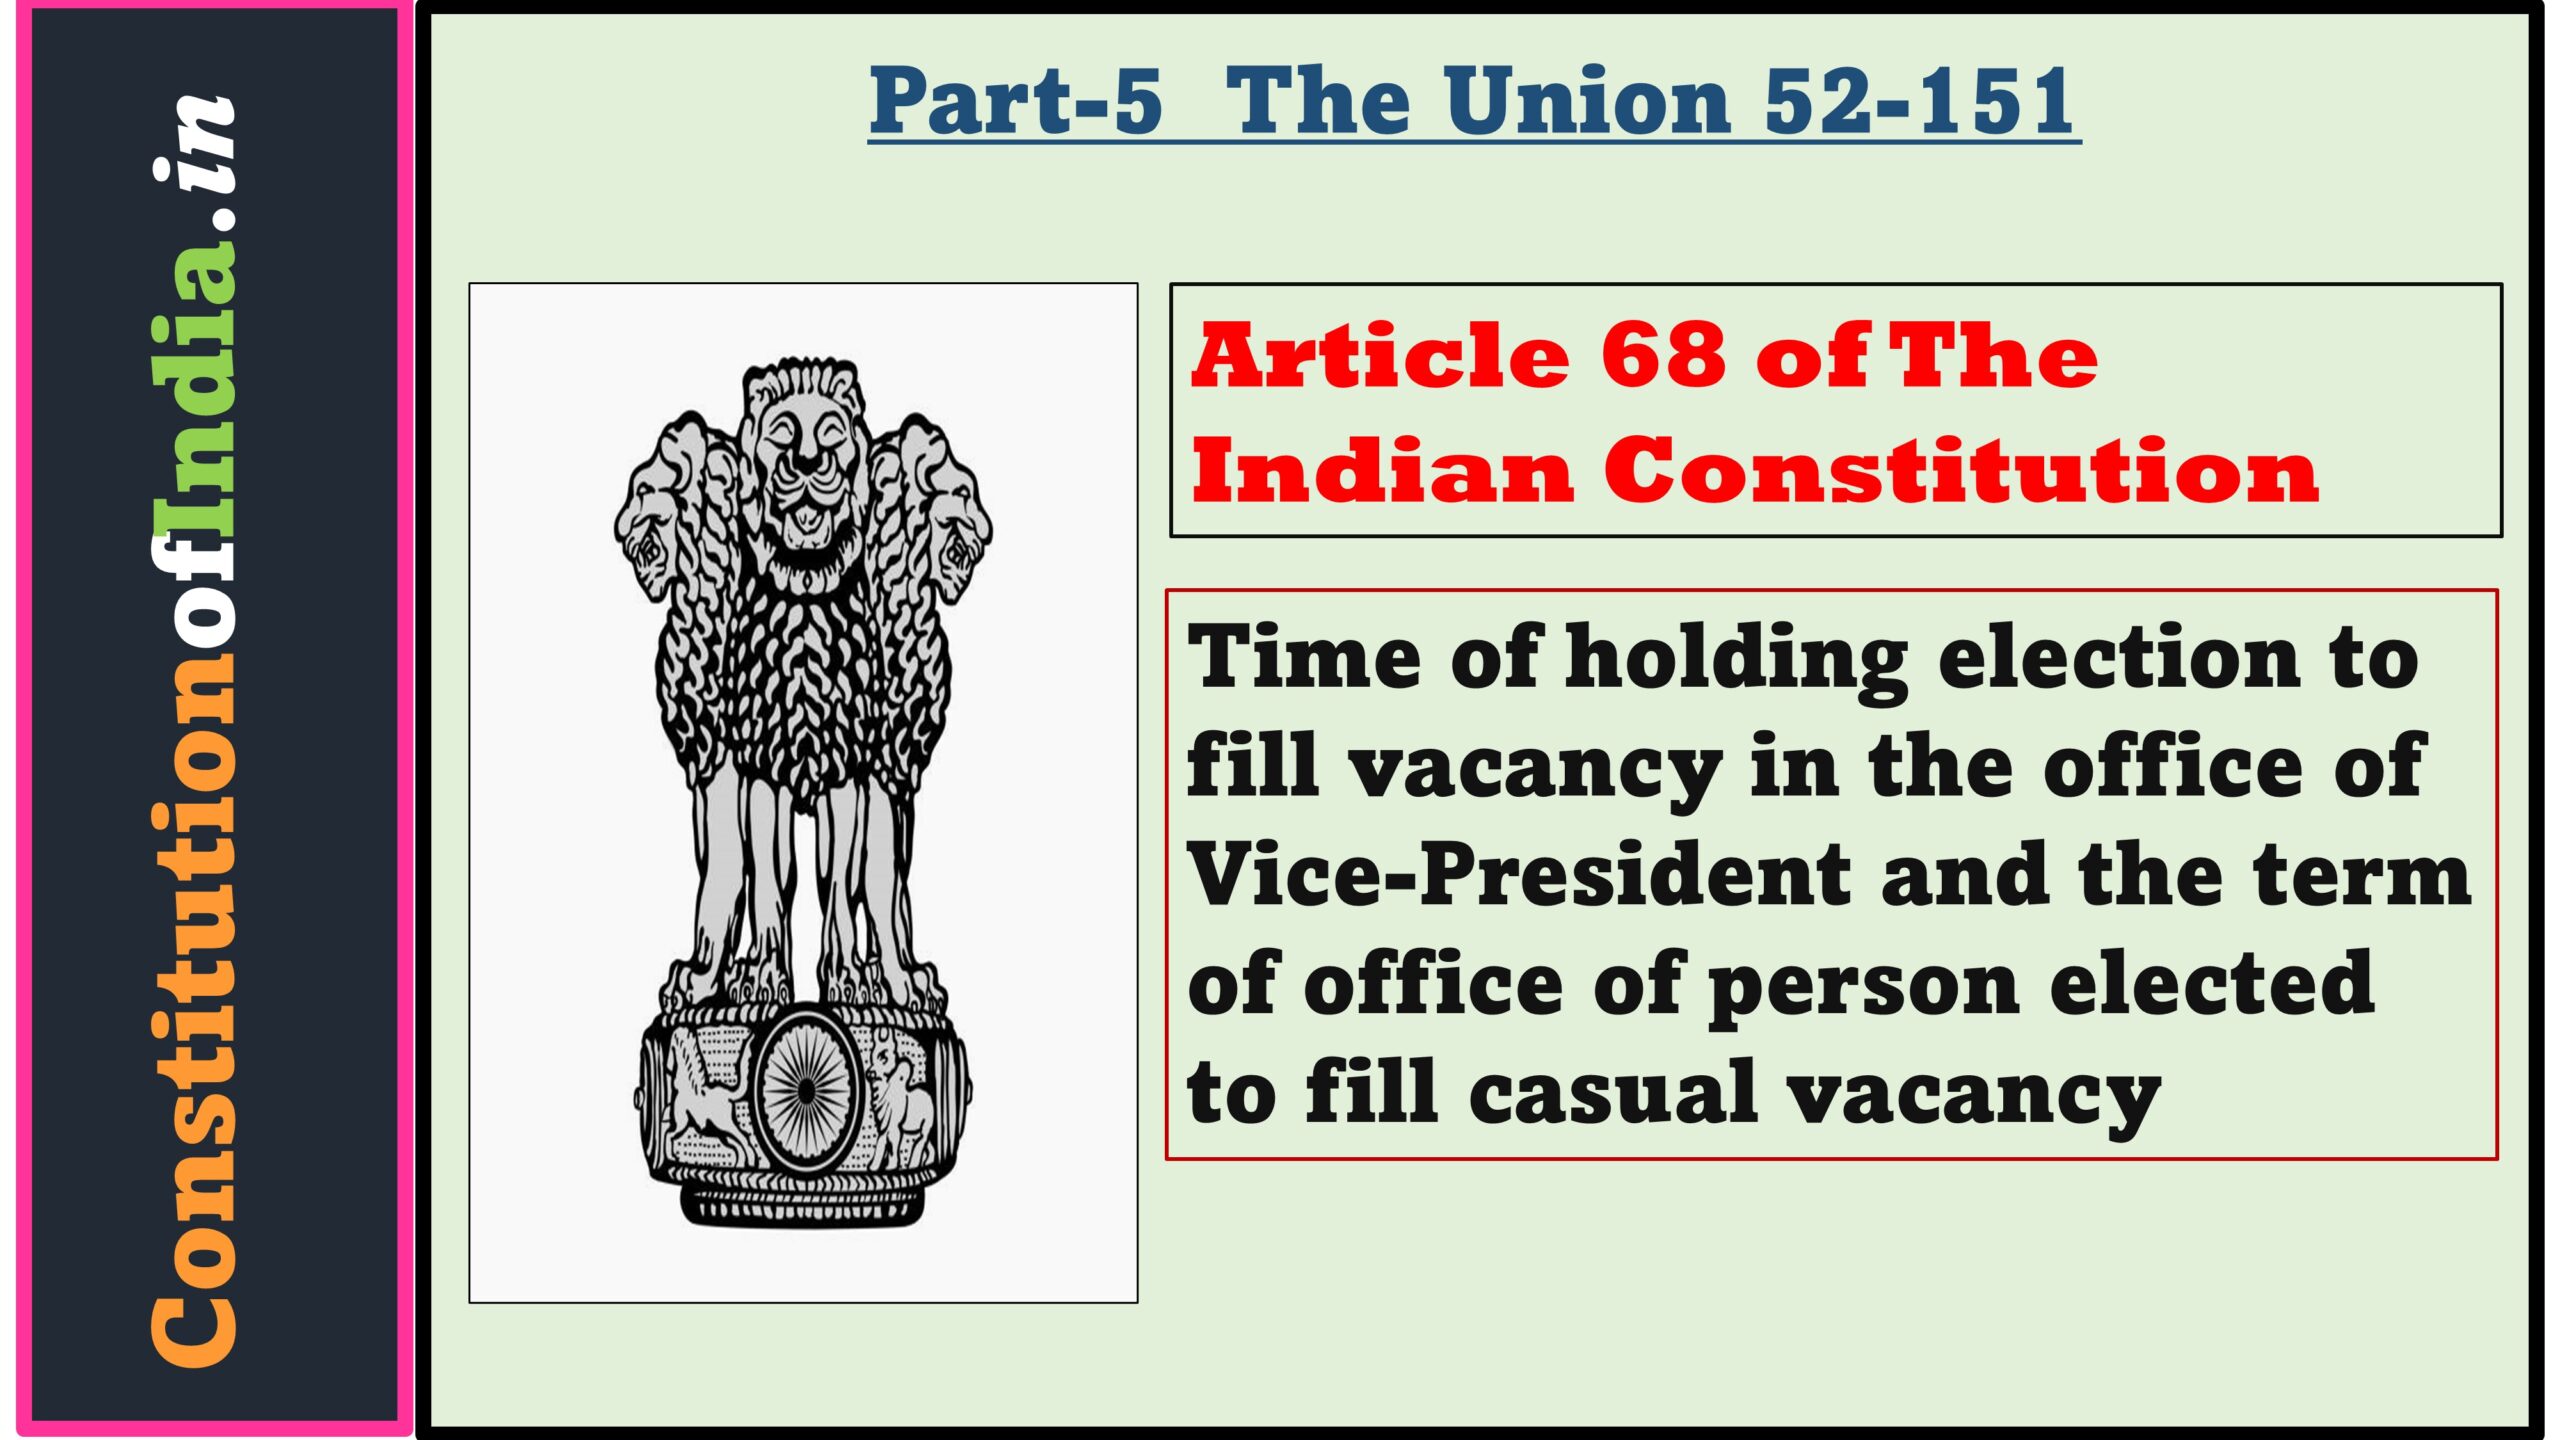 Article 68 of Indian Constitution